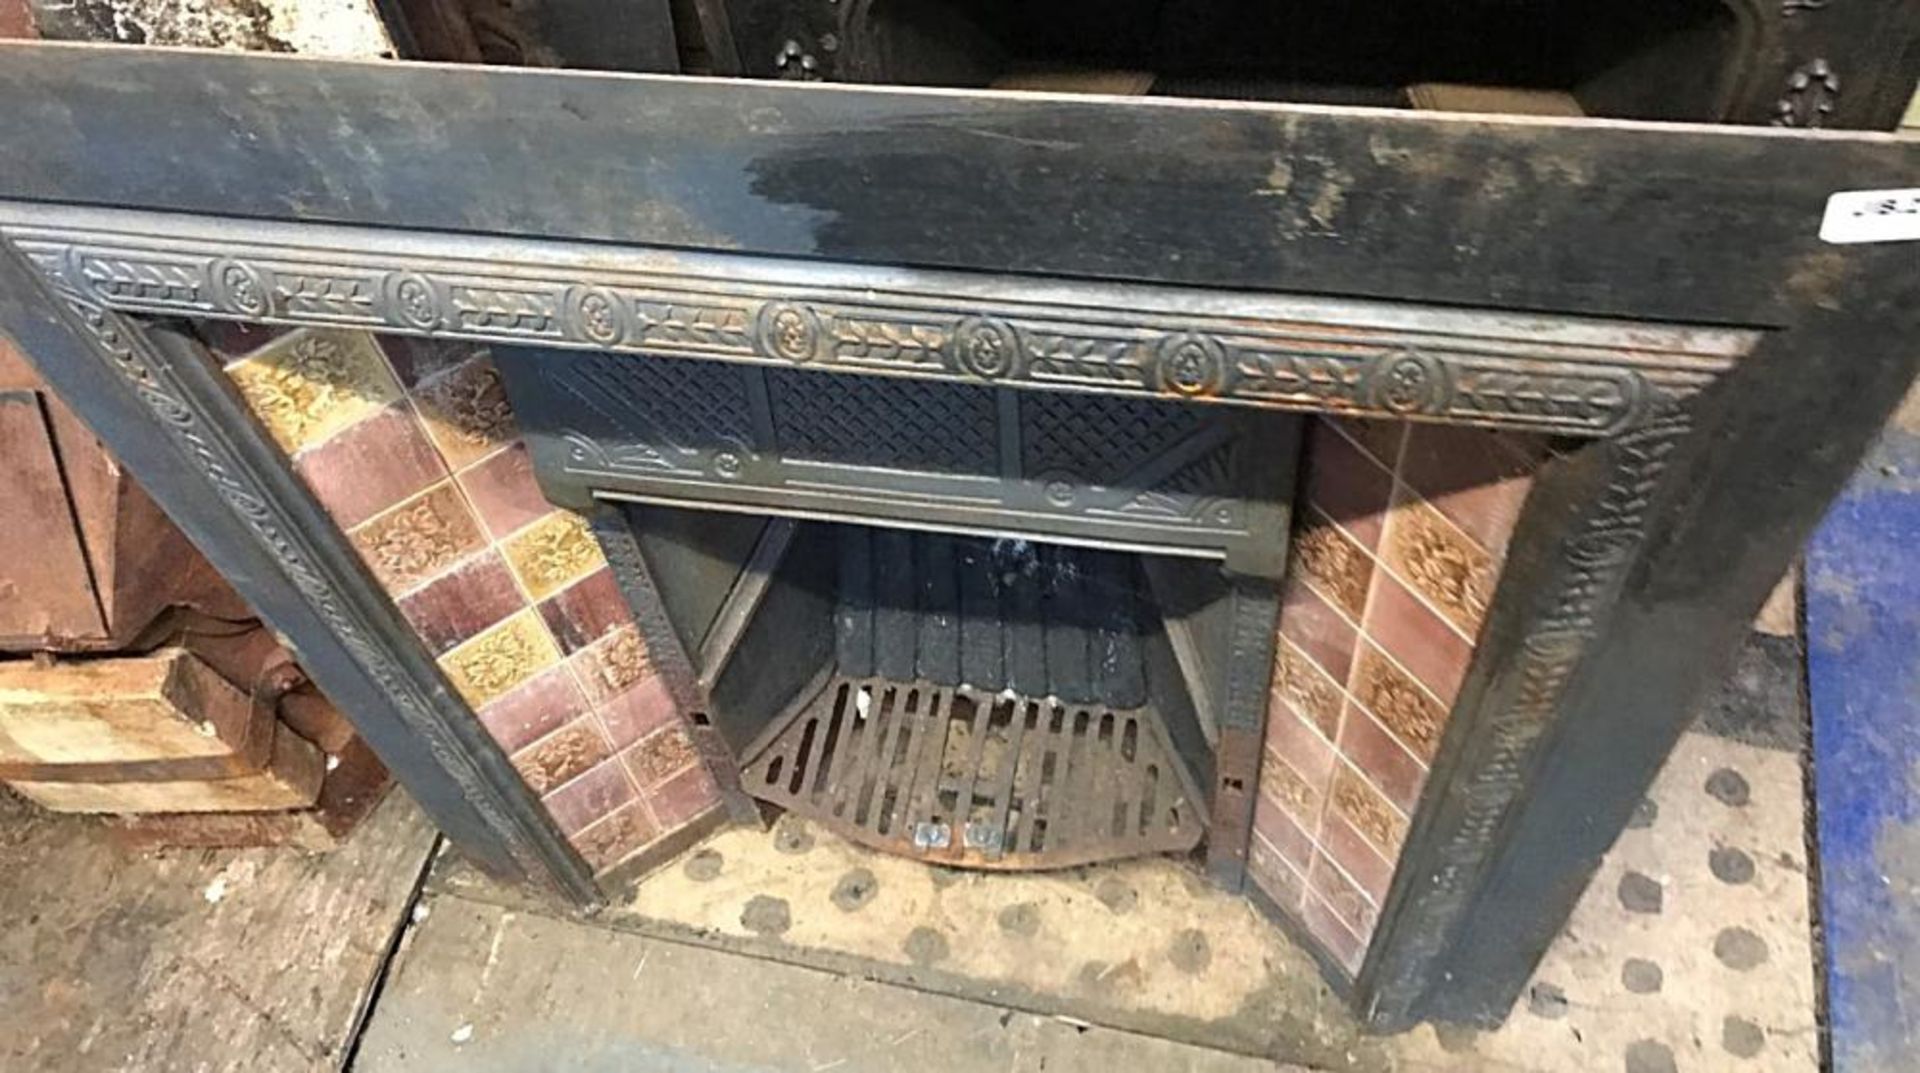 1 x Antique Victorian Cast Iron Fire Insert With Patterned Tiles To Sides - Dimensions: width 92cm x - Image 4 of 4